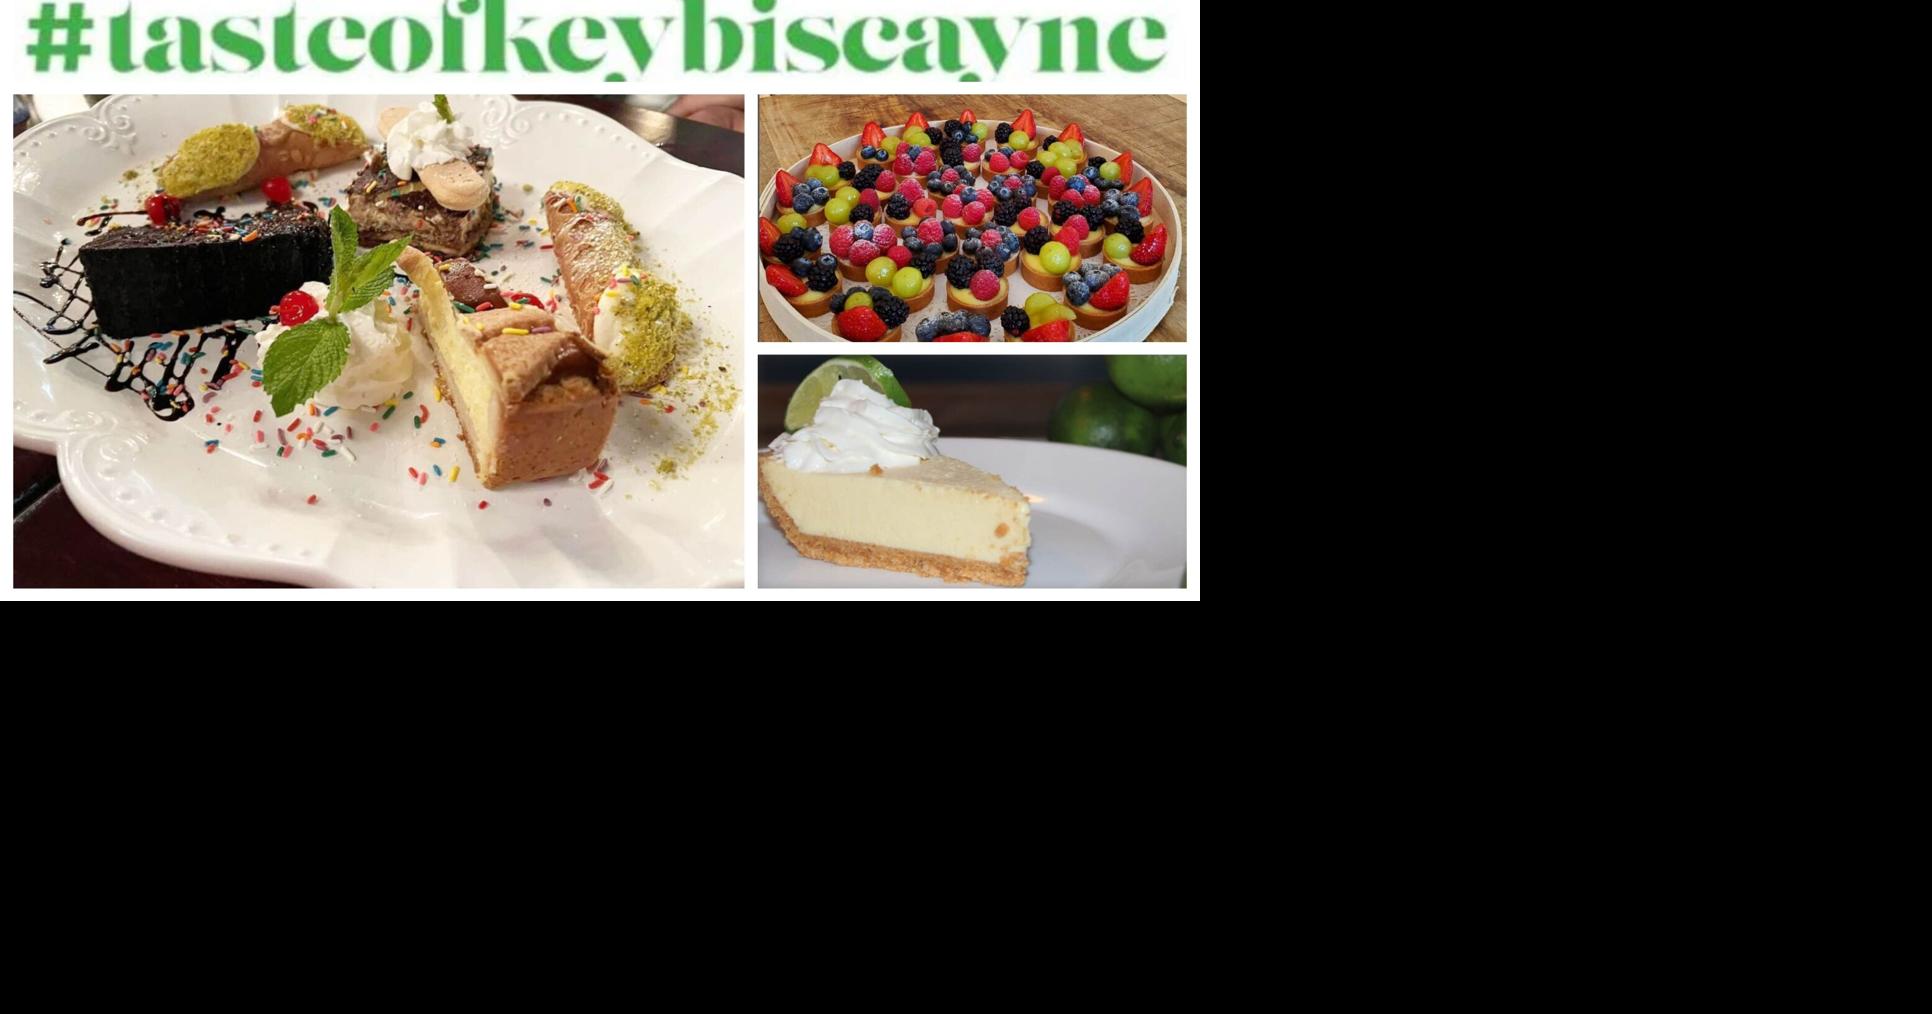 Incredible desserts awaits on Key Biscayne this Sunday